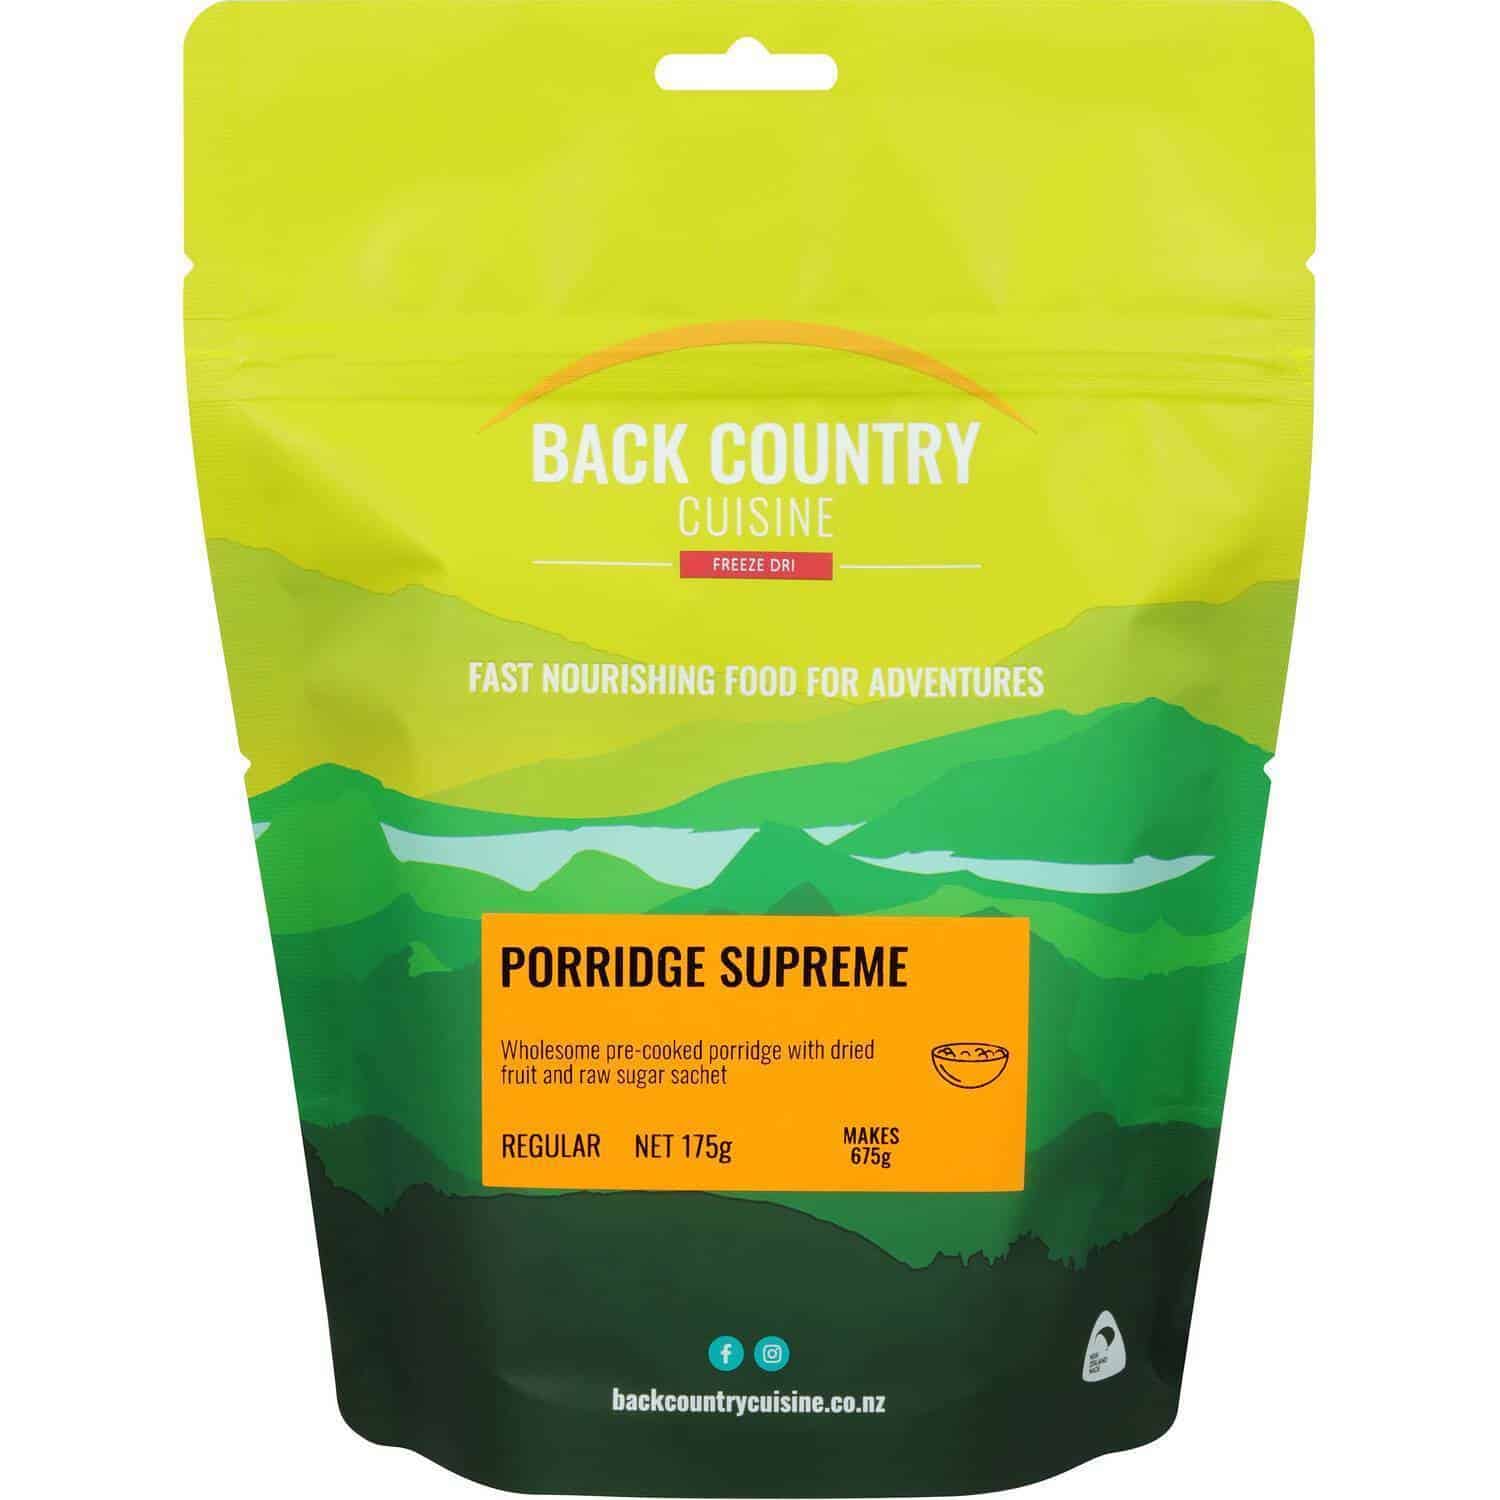 Back Country Cuisine Porridge Supreme Regular - Tramping Food and Accessories sold by Venture Outdoors NZ